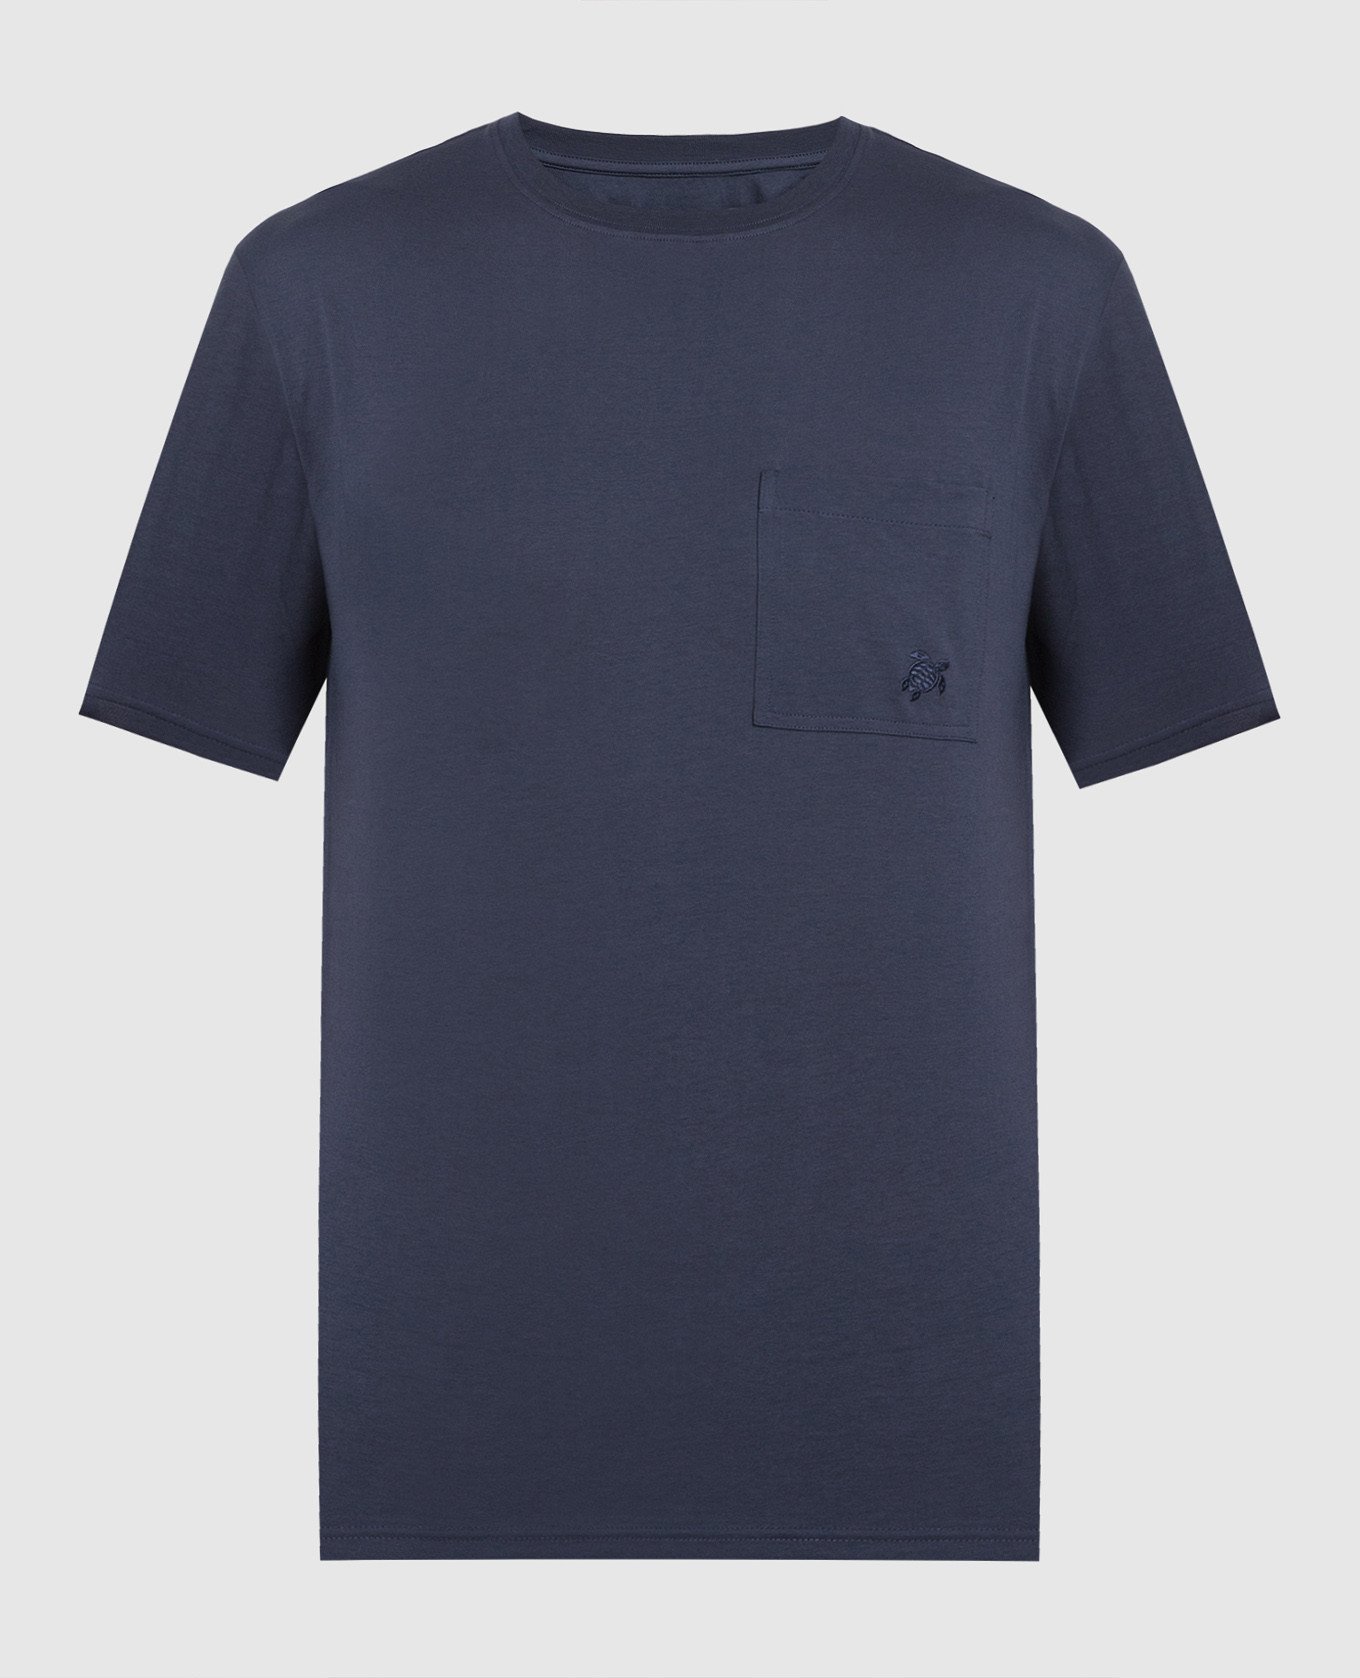 Titus blue t-shirt with logo embroidery